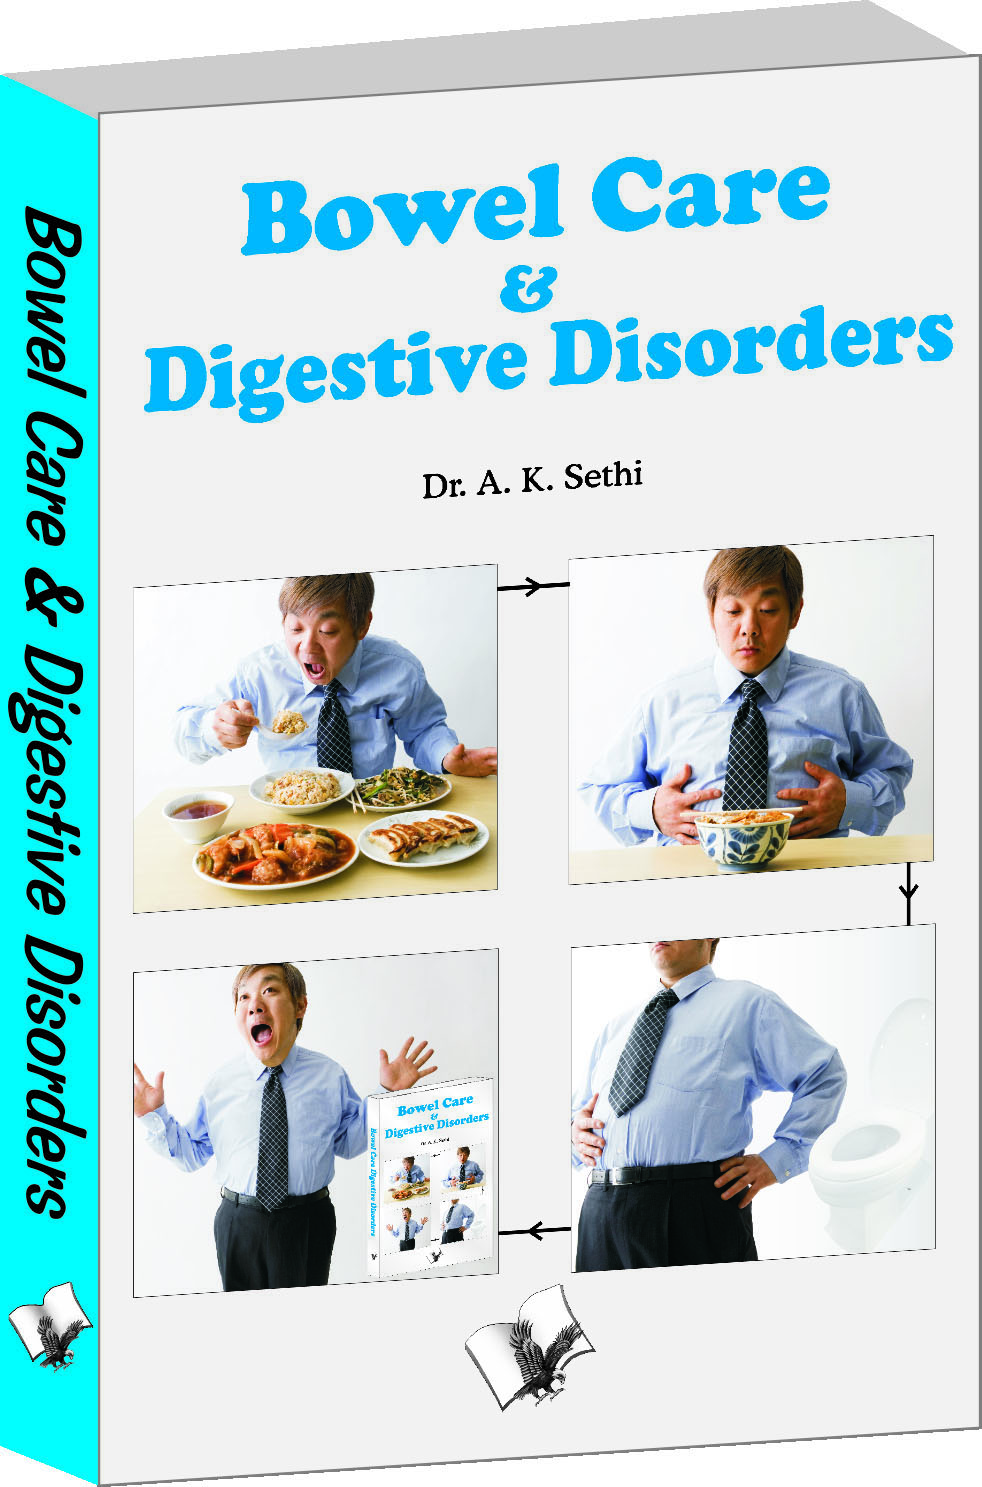 Bowel Care And Digestive Disorders-Preventive actions to keep stomach healthy and body disease-free